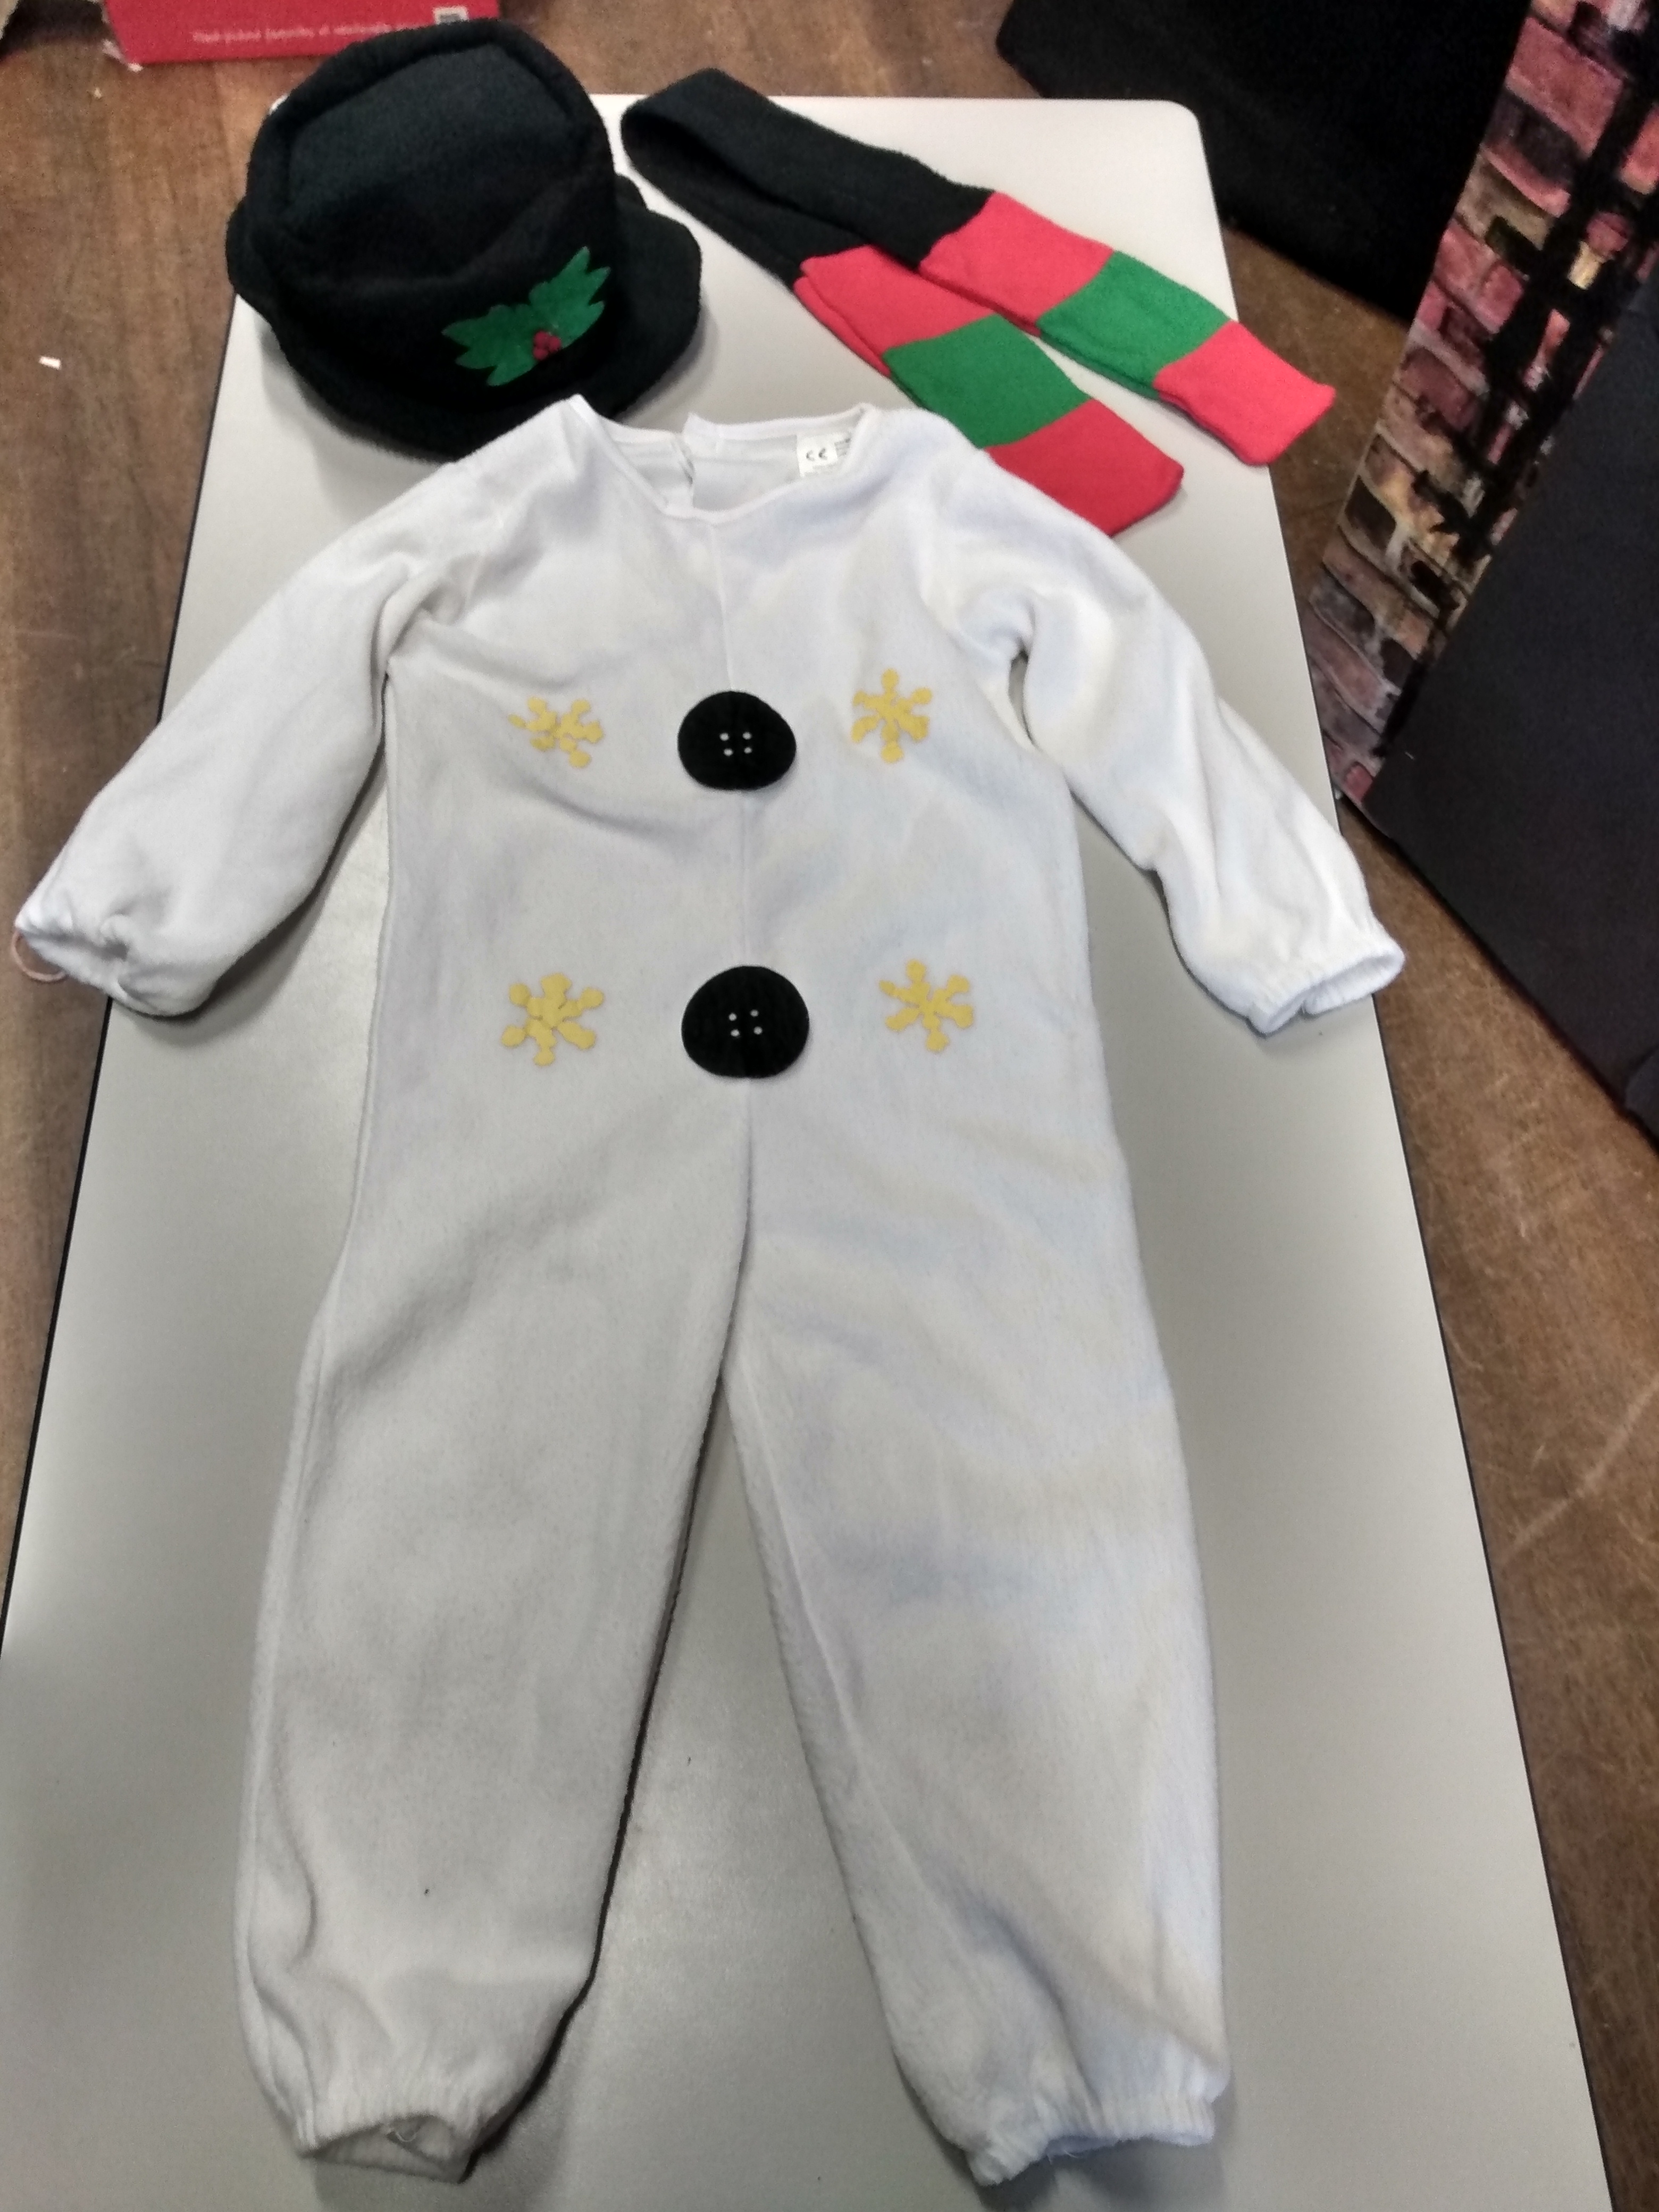 Toddler Snowman outfit size 90-104cm